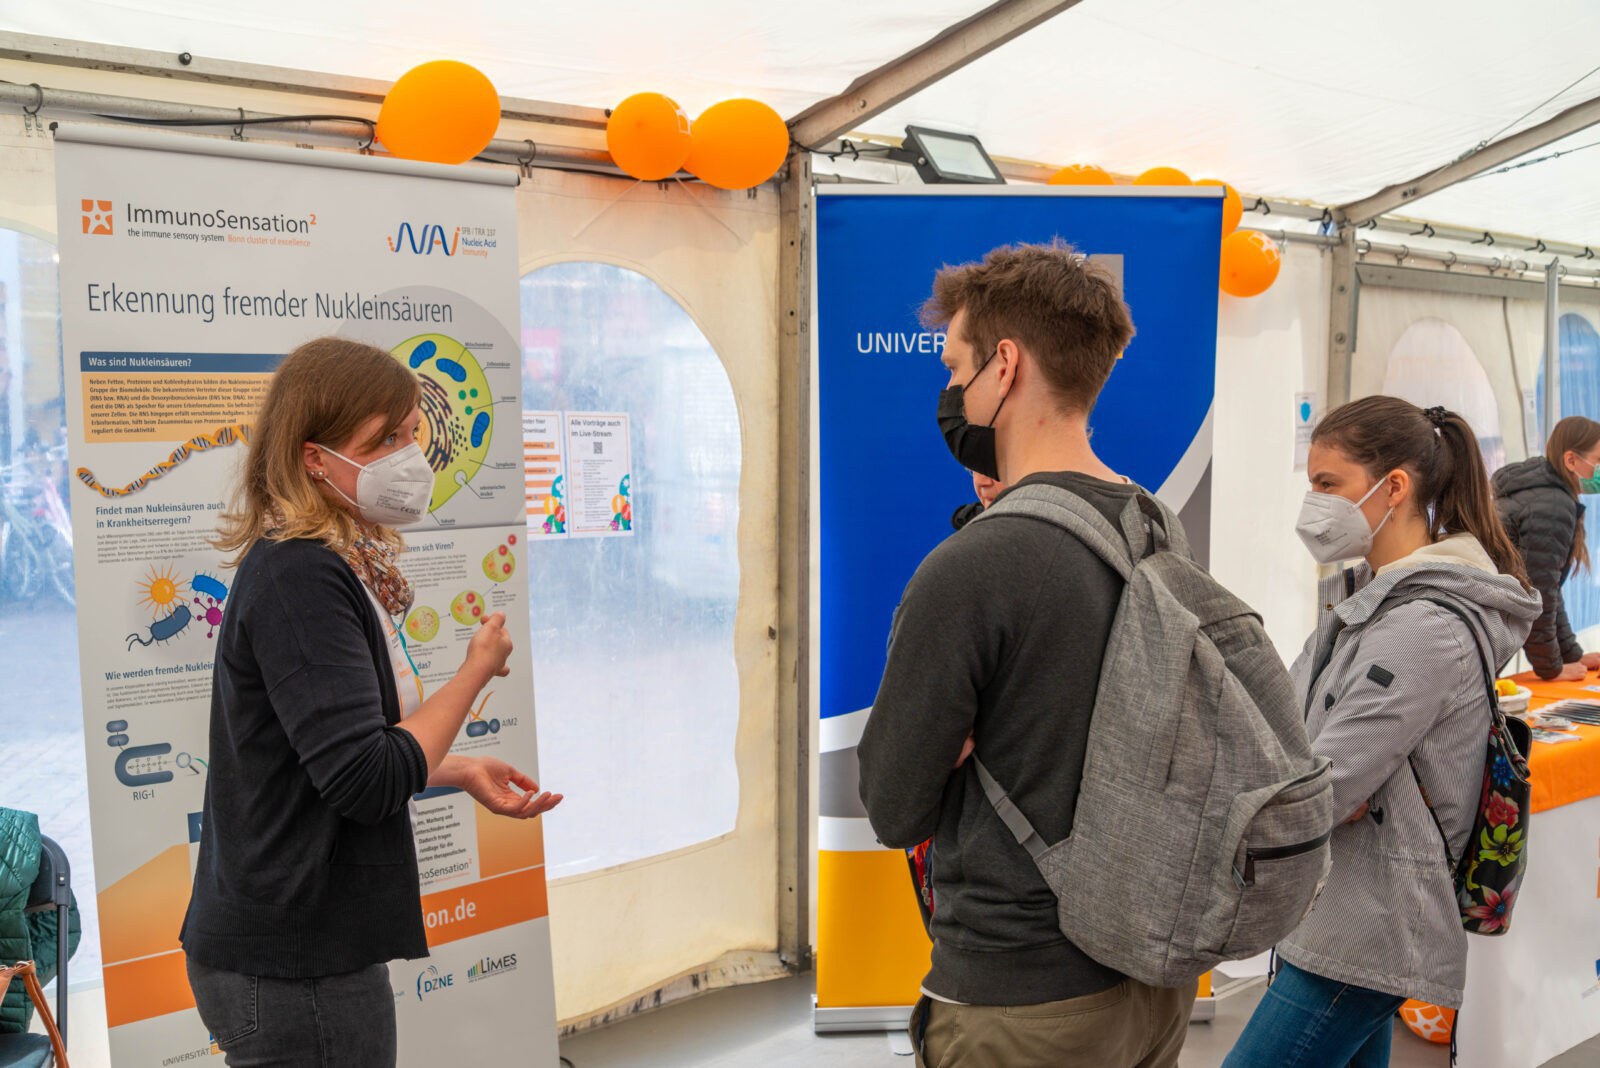 To mark the International Day of Immunology, researchers from the ImmunoSensation2 Cluster of Excellence will be sharing information in Bonn city center.